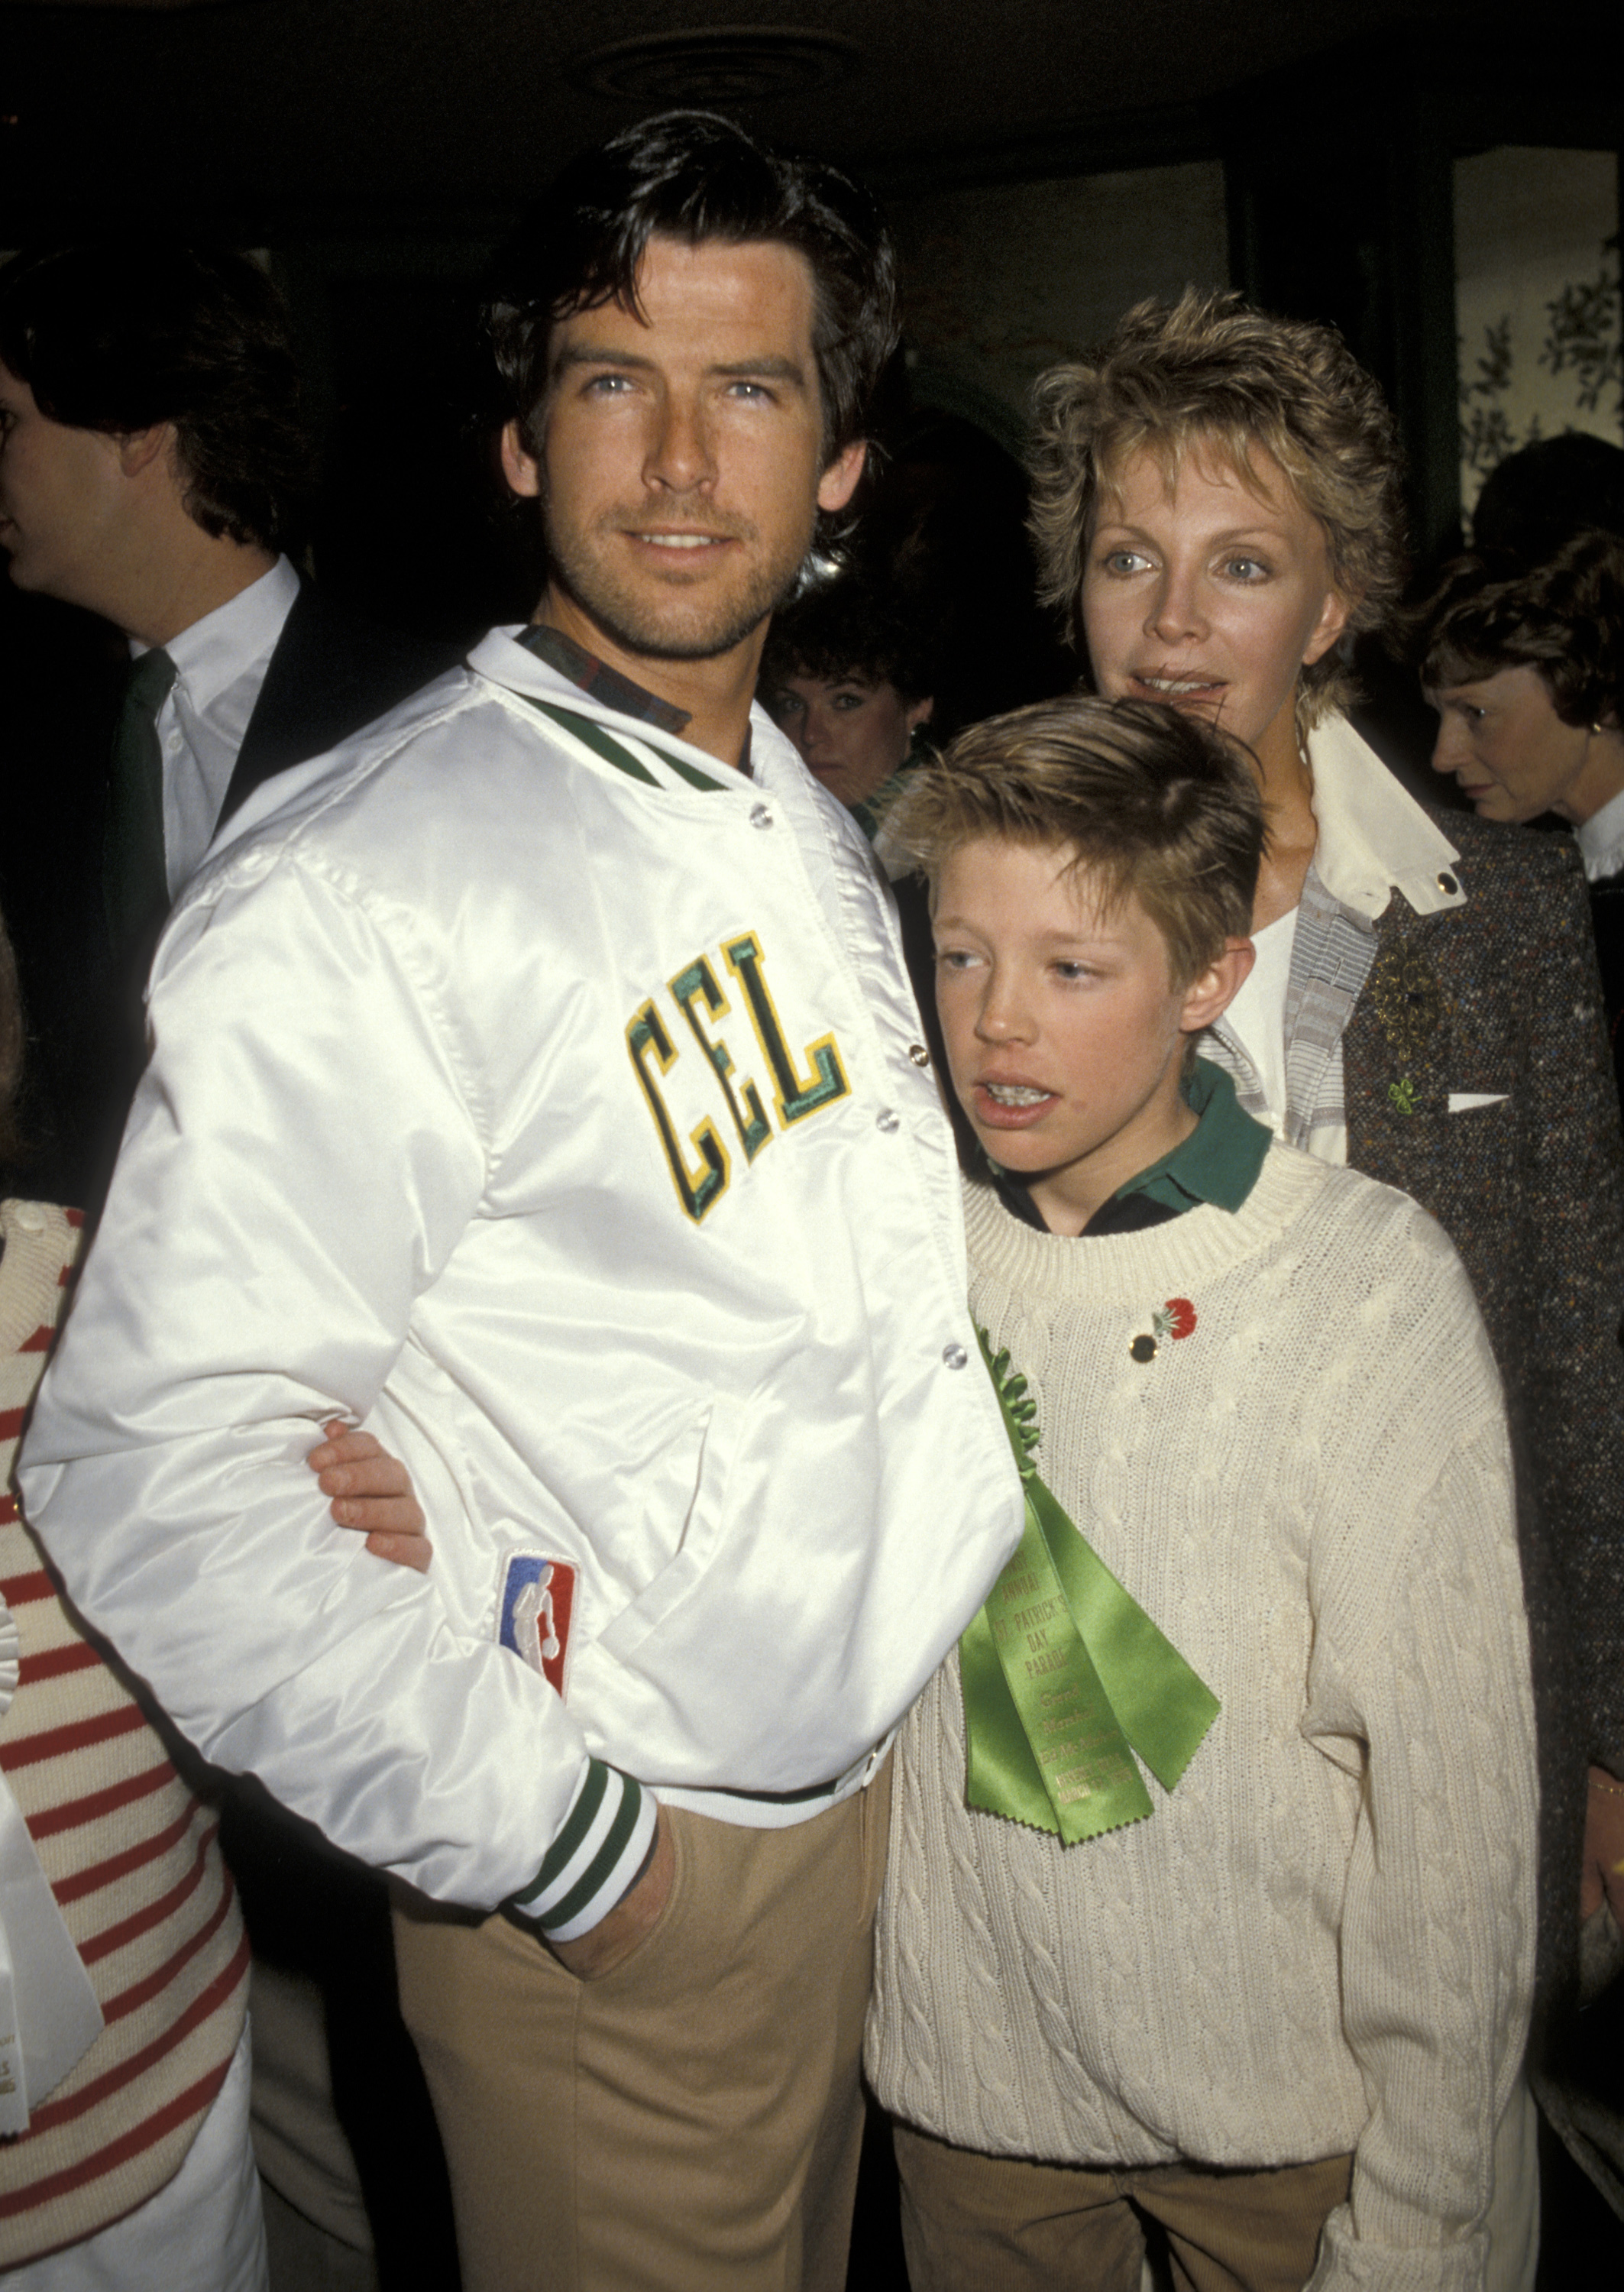 Pierce Brosnan, wife Charlotte Harris and son Christopher Harris circa 1985. | Source: Getty Images